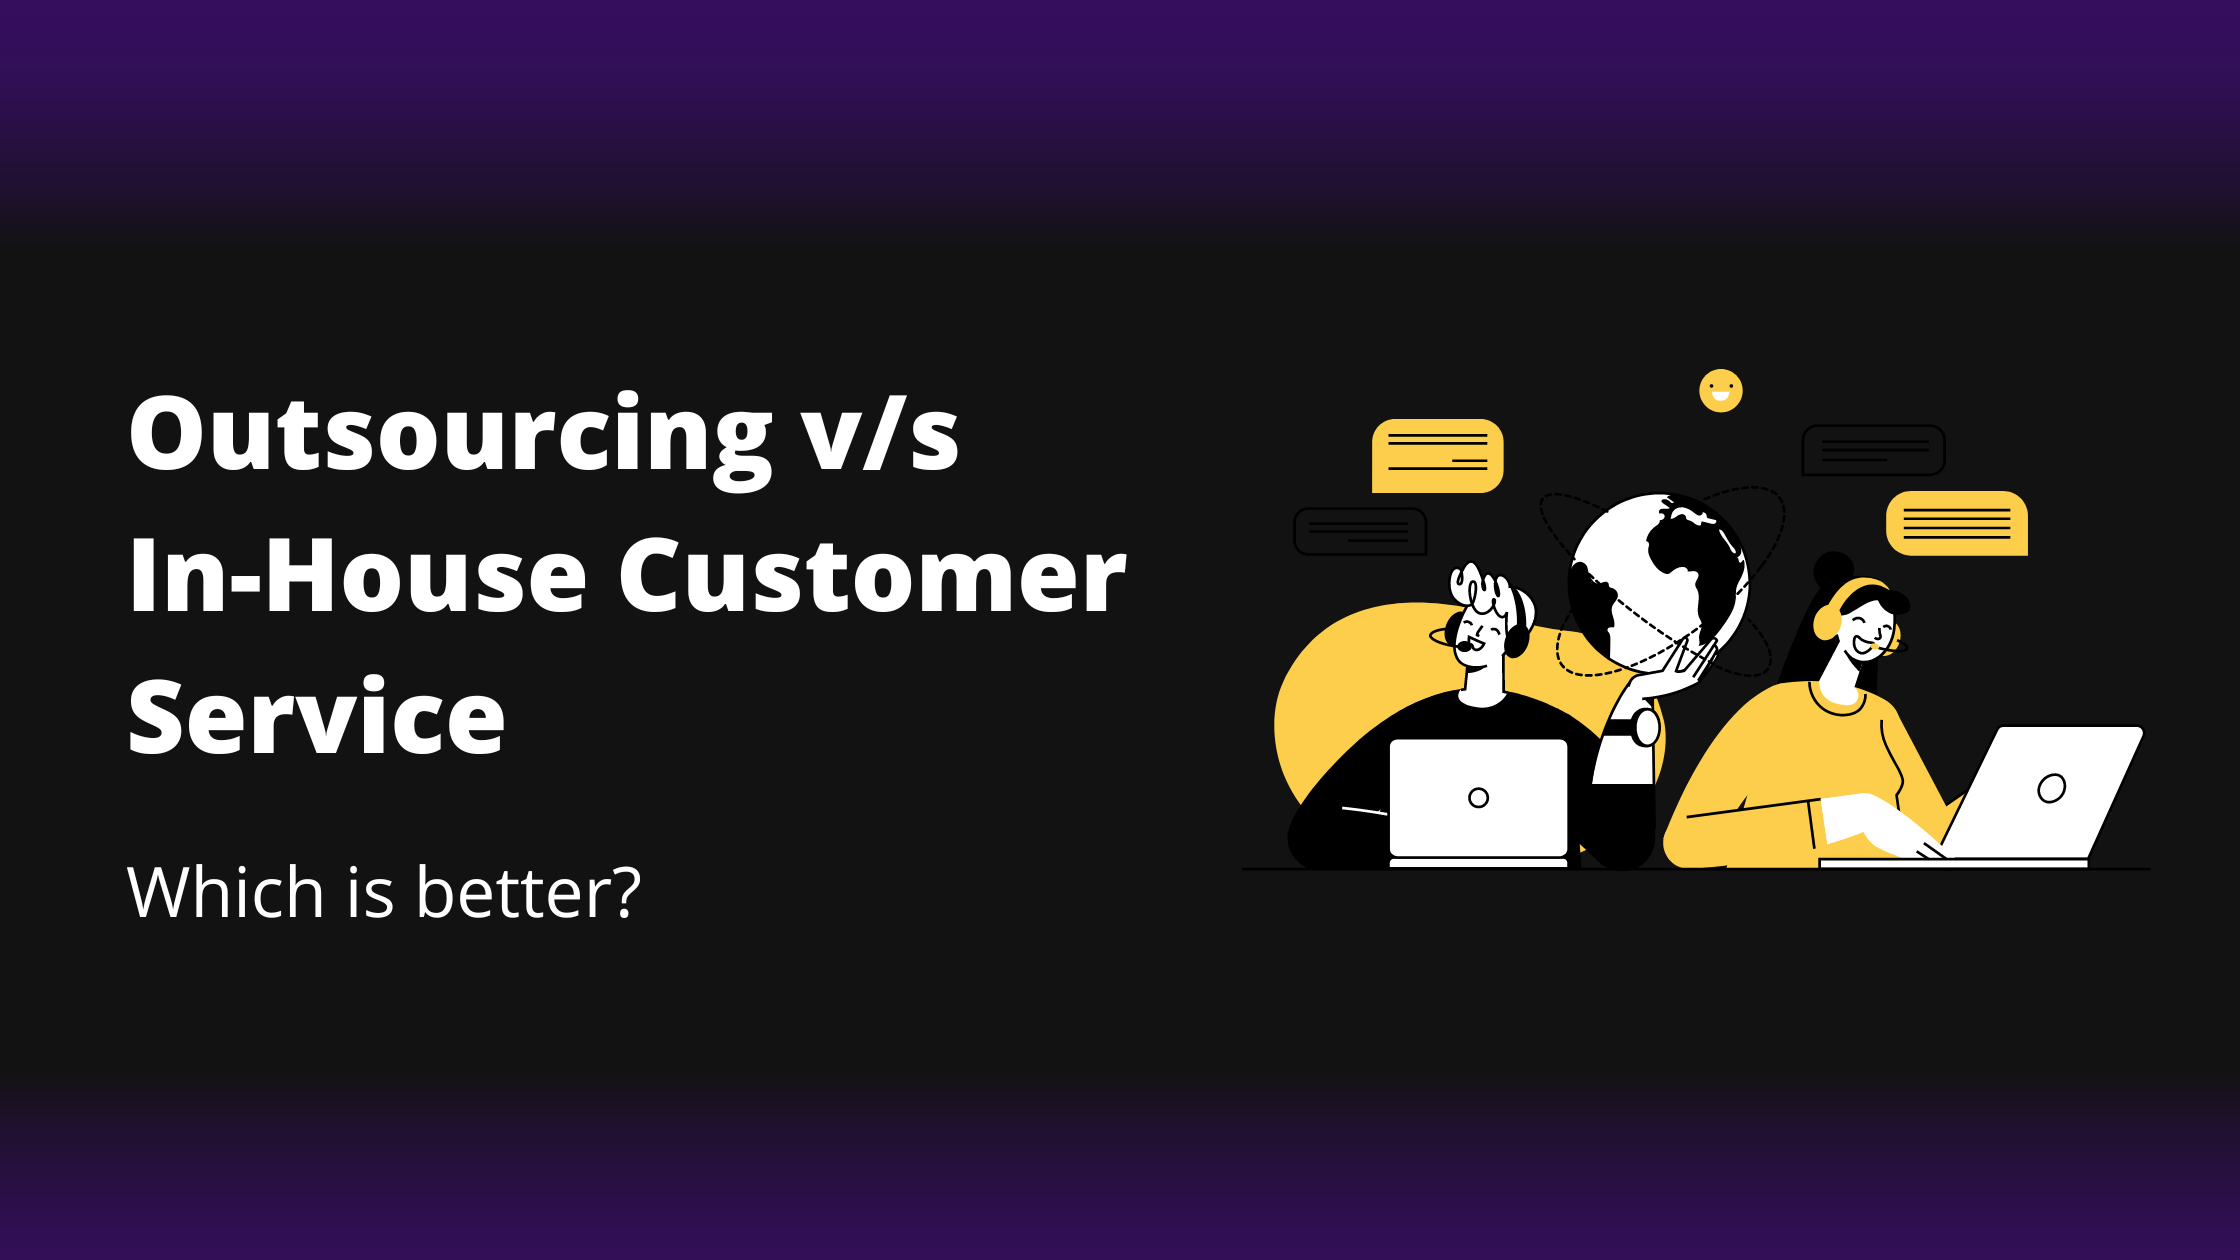 Outsourcing VS In-house Customer Service